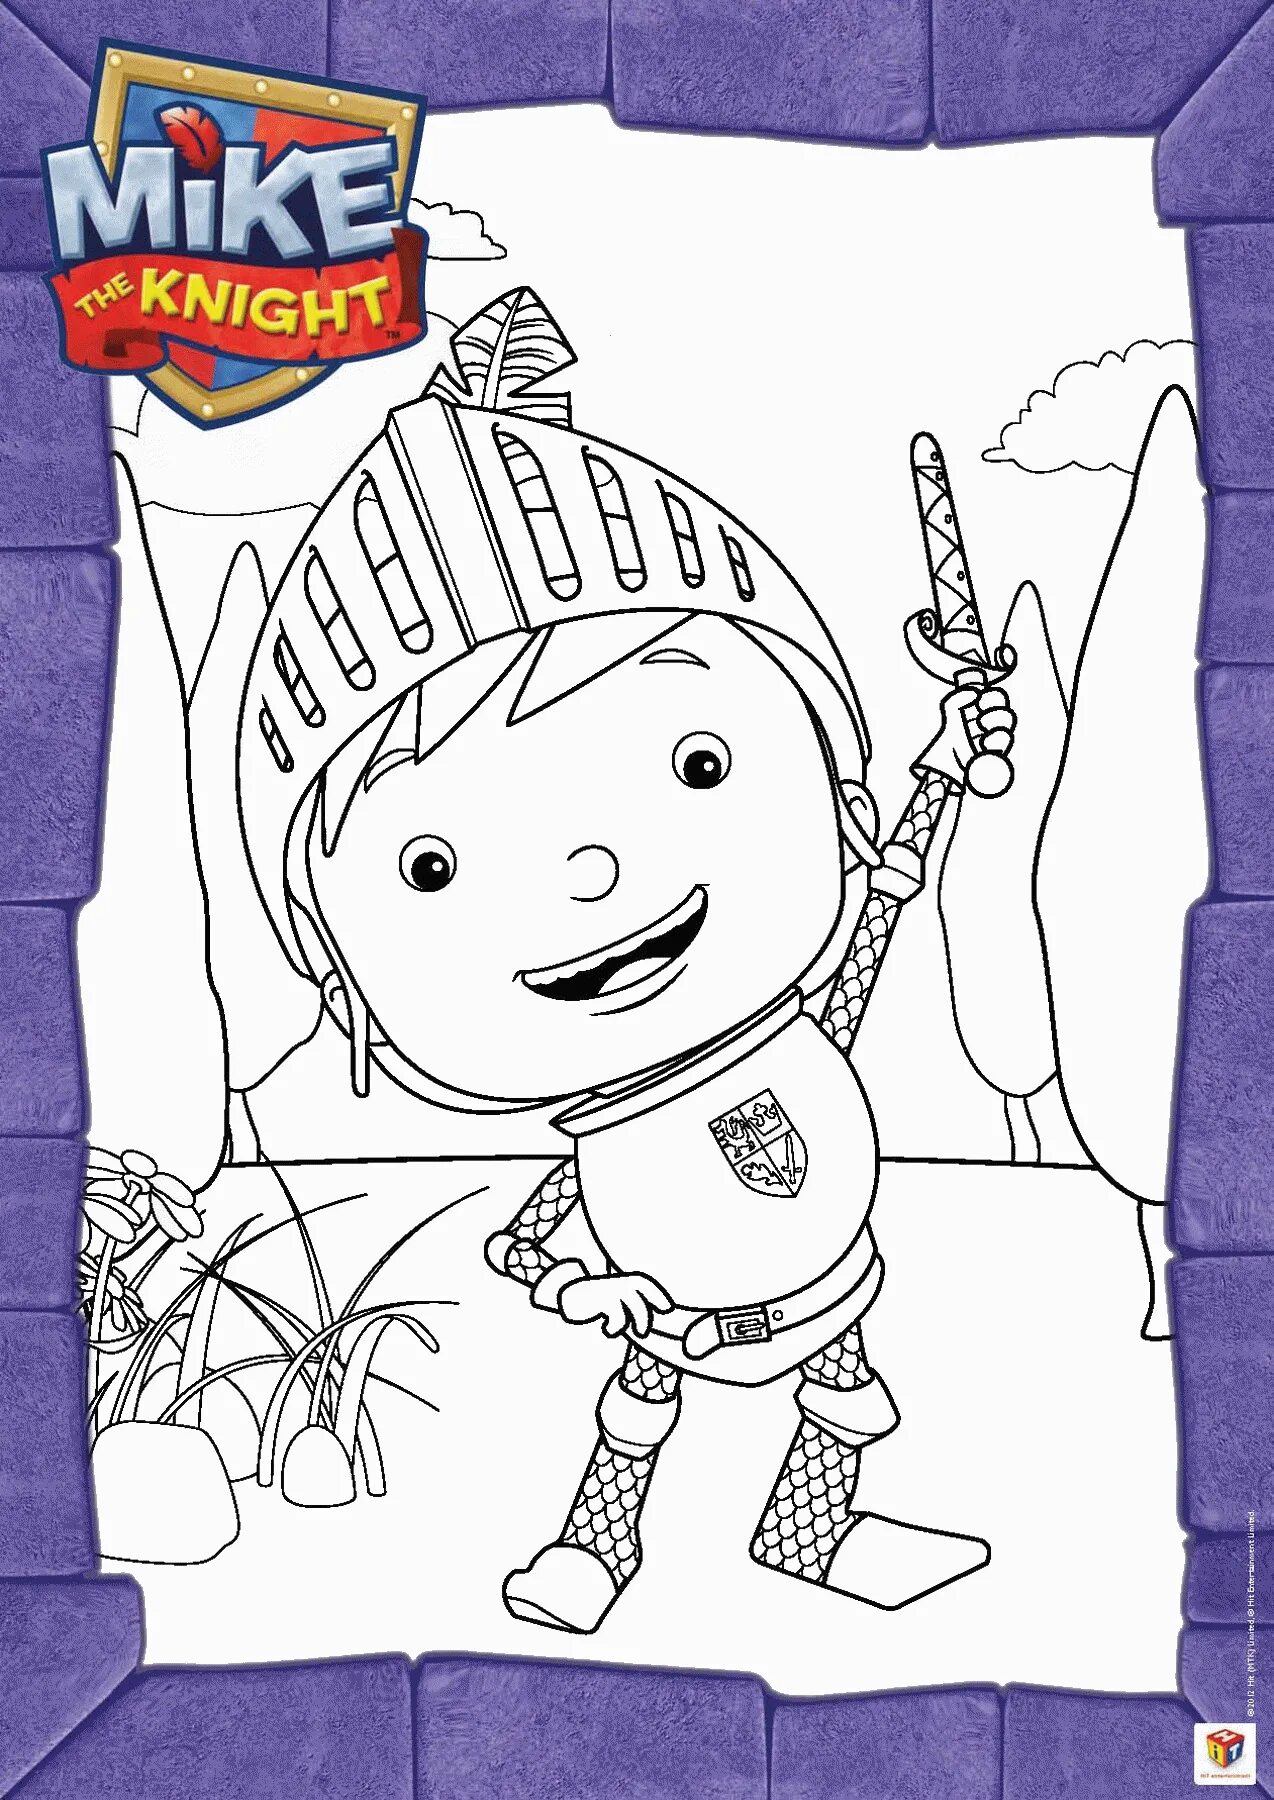 Knight mike #11